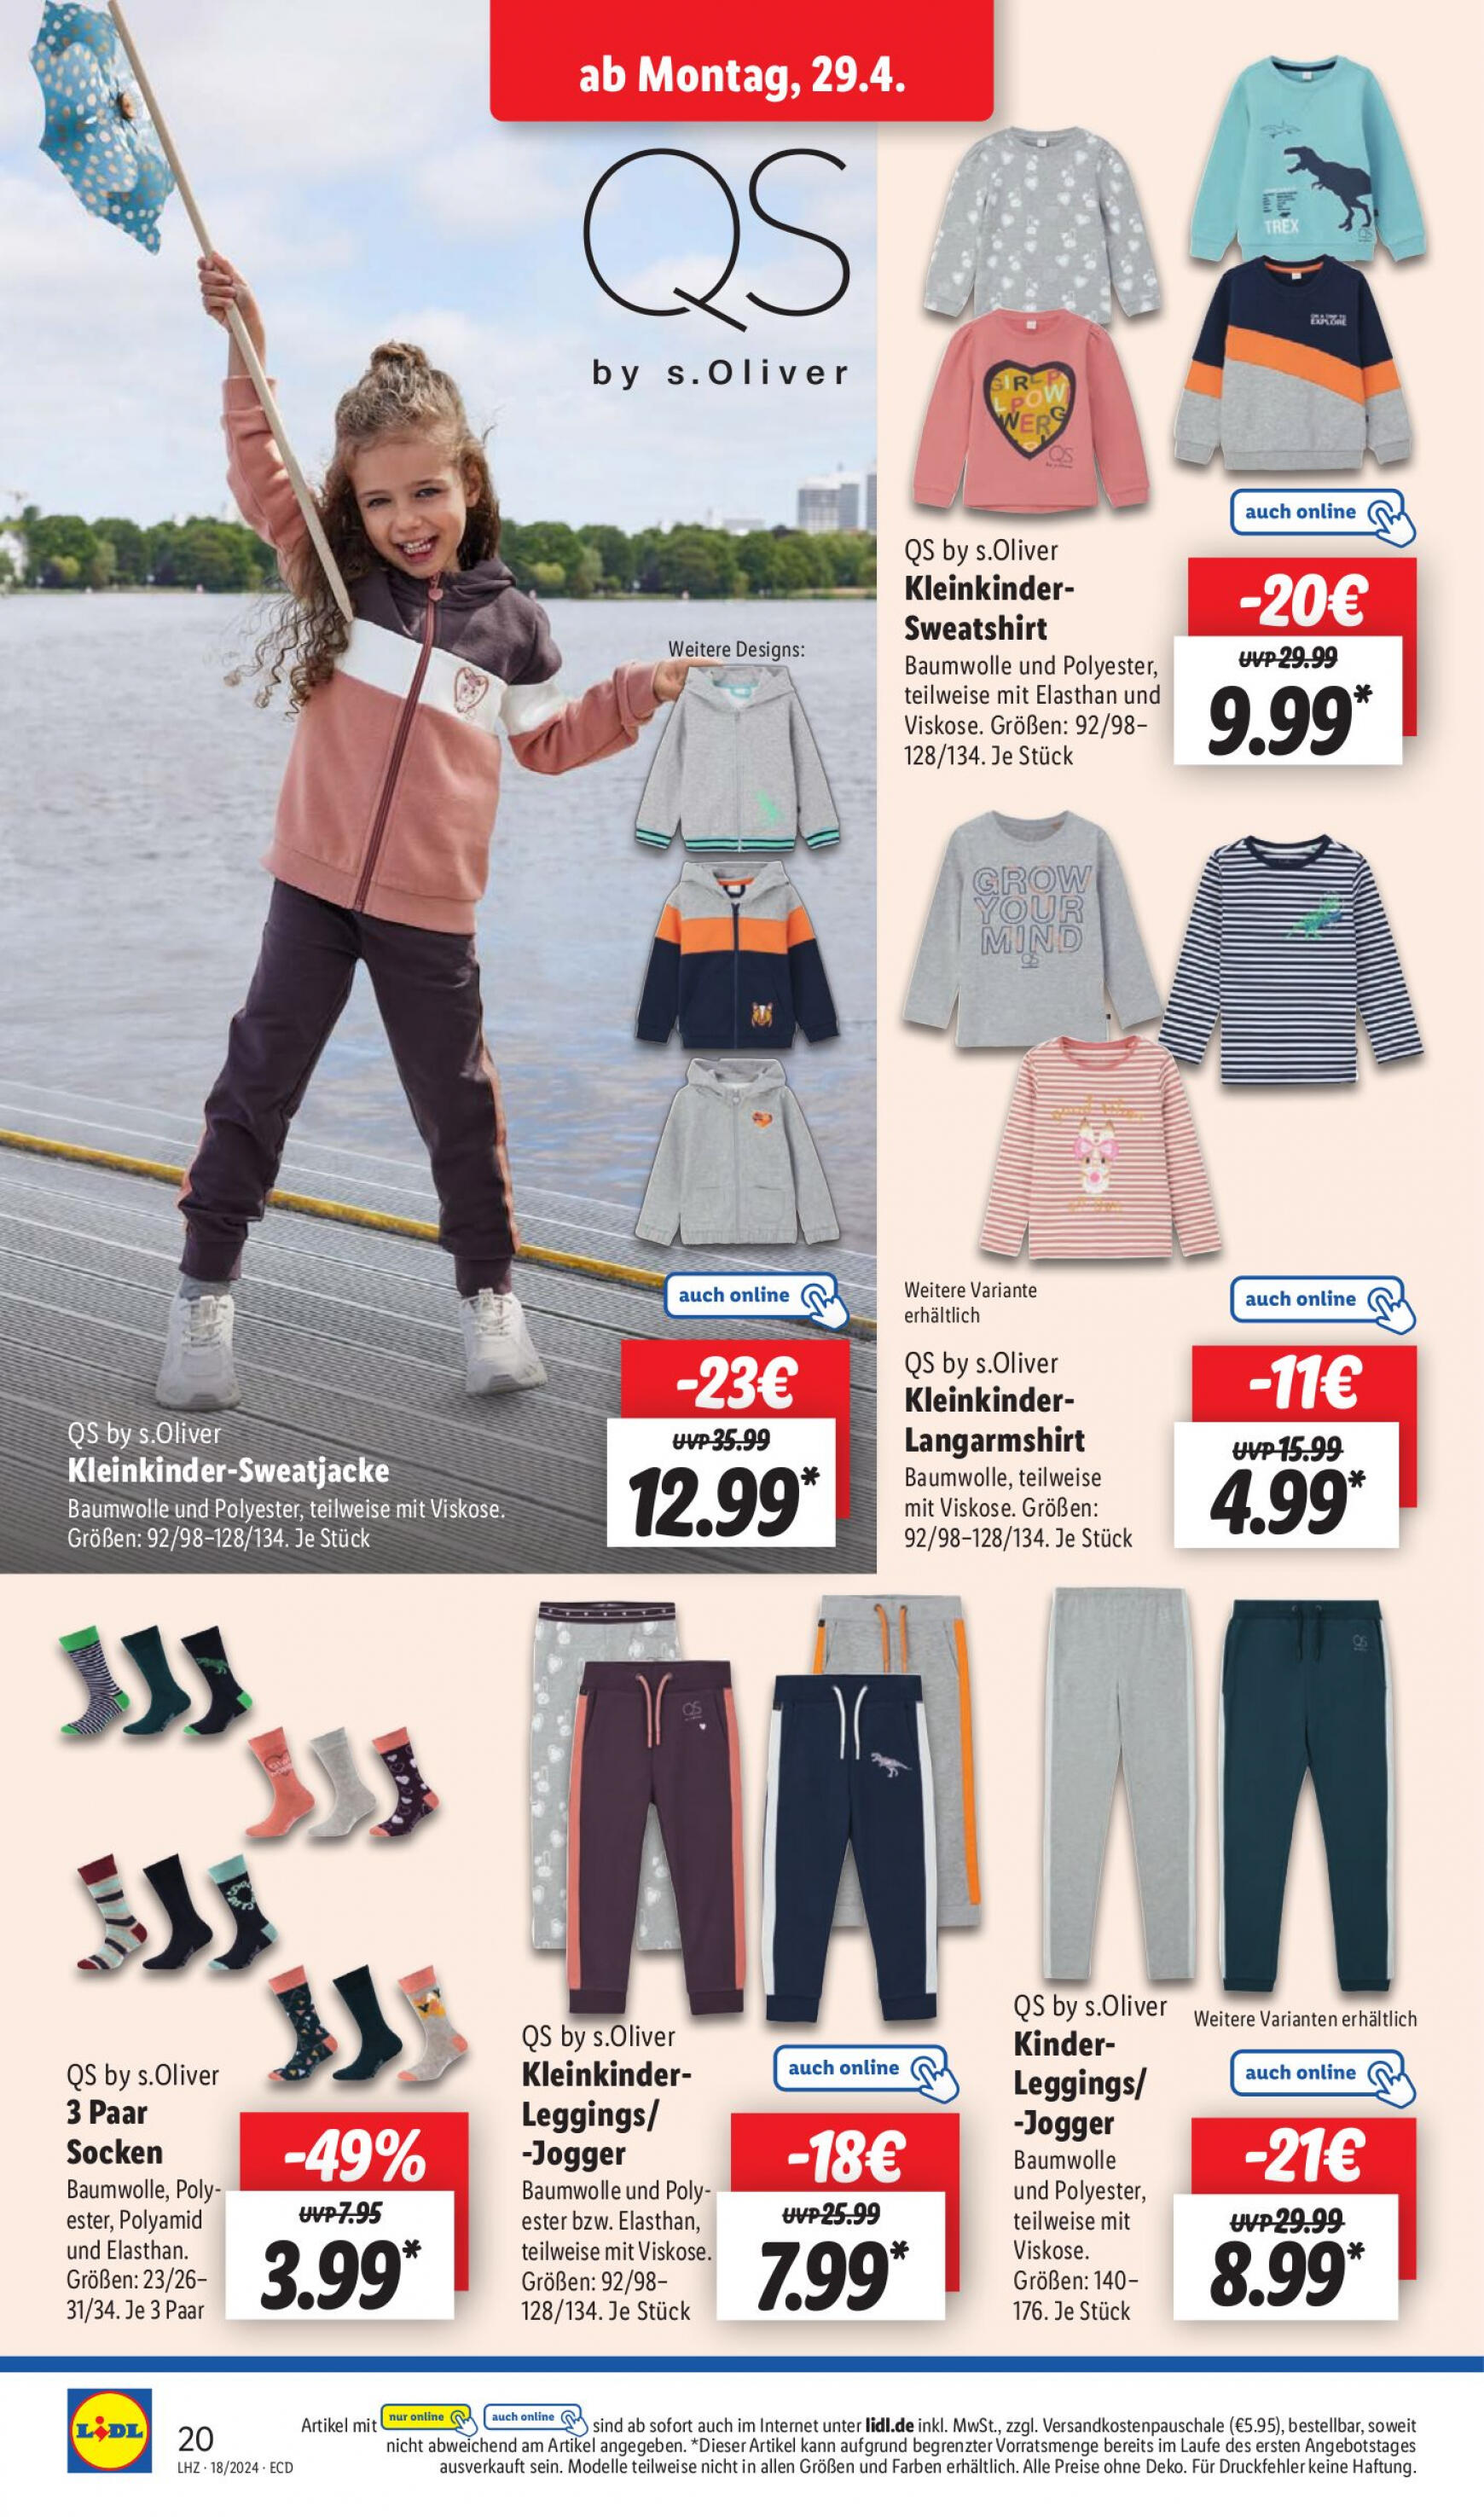 lidl - Flyer Lidl aktuell 29.04. - 04.05. - page: 24